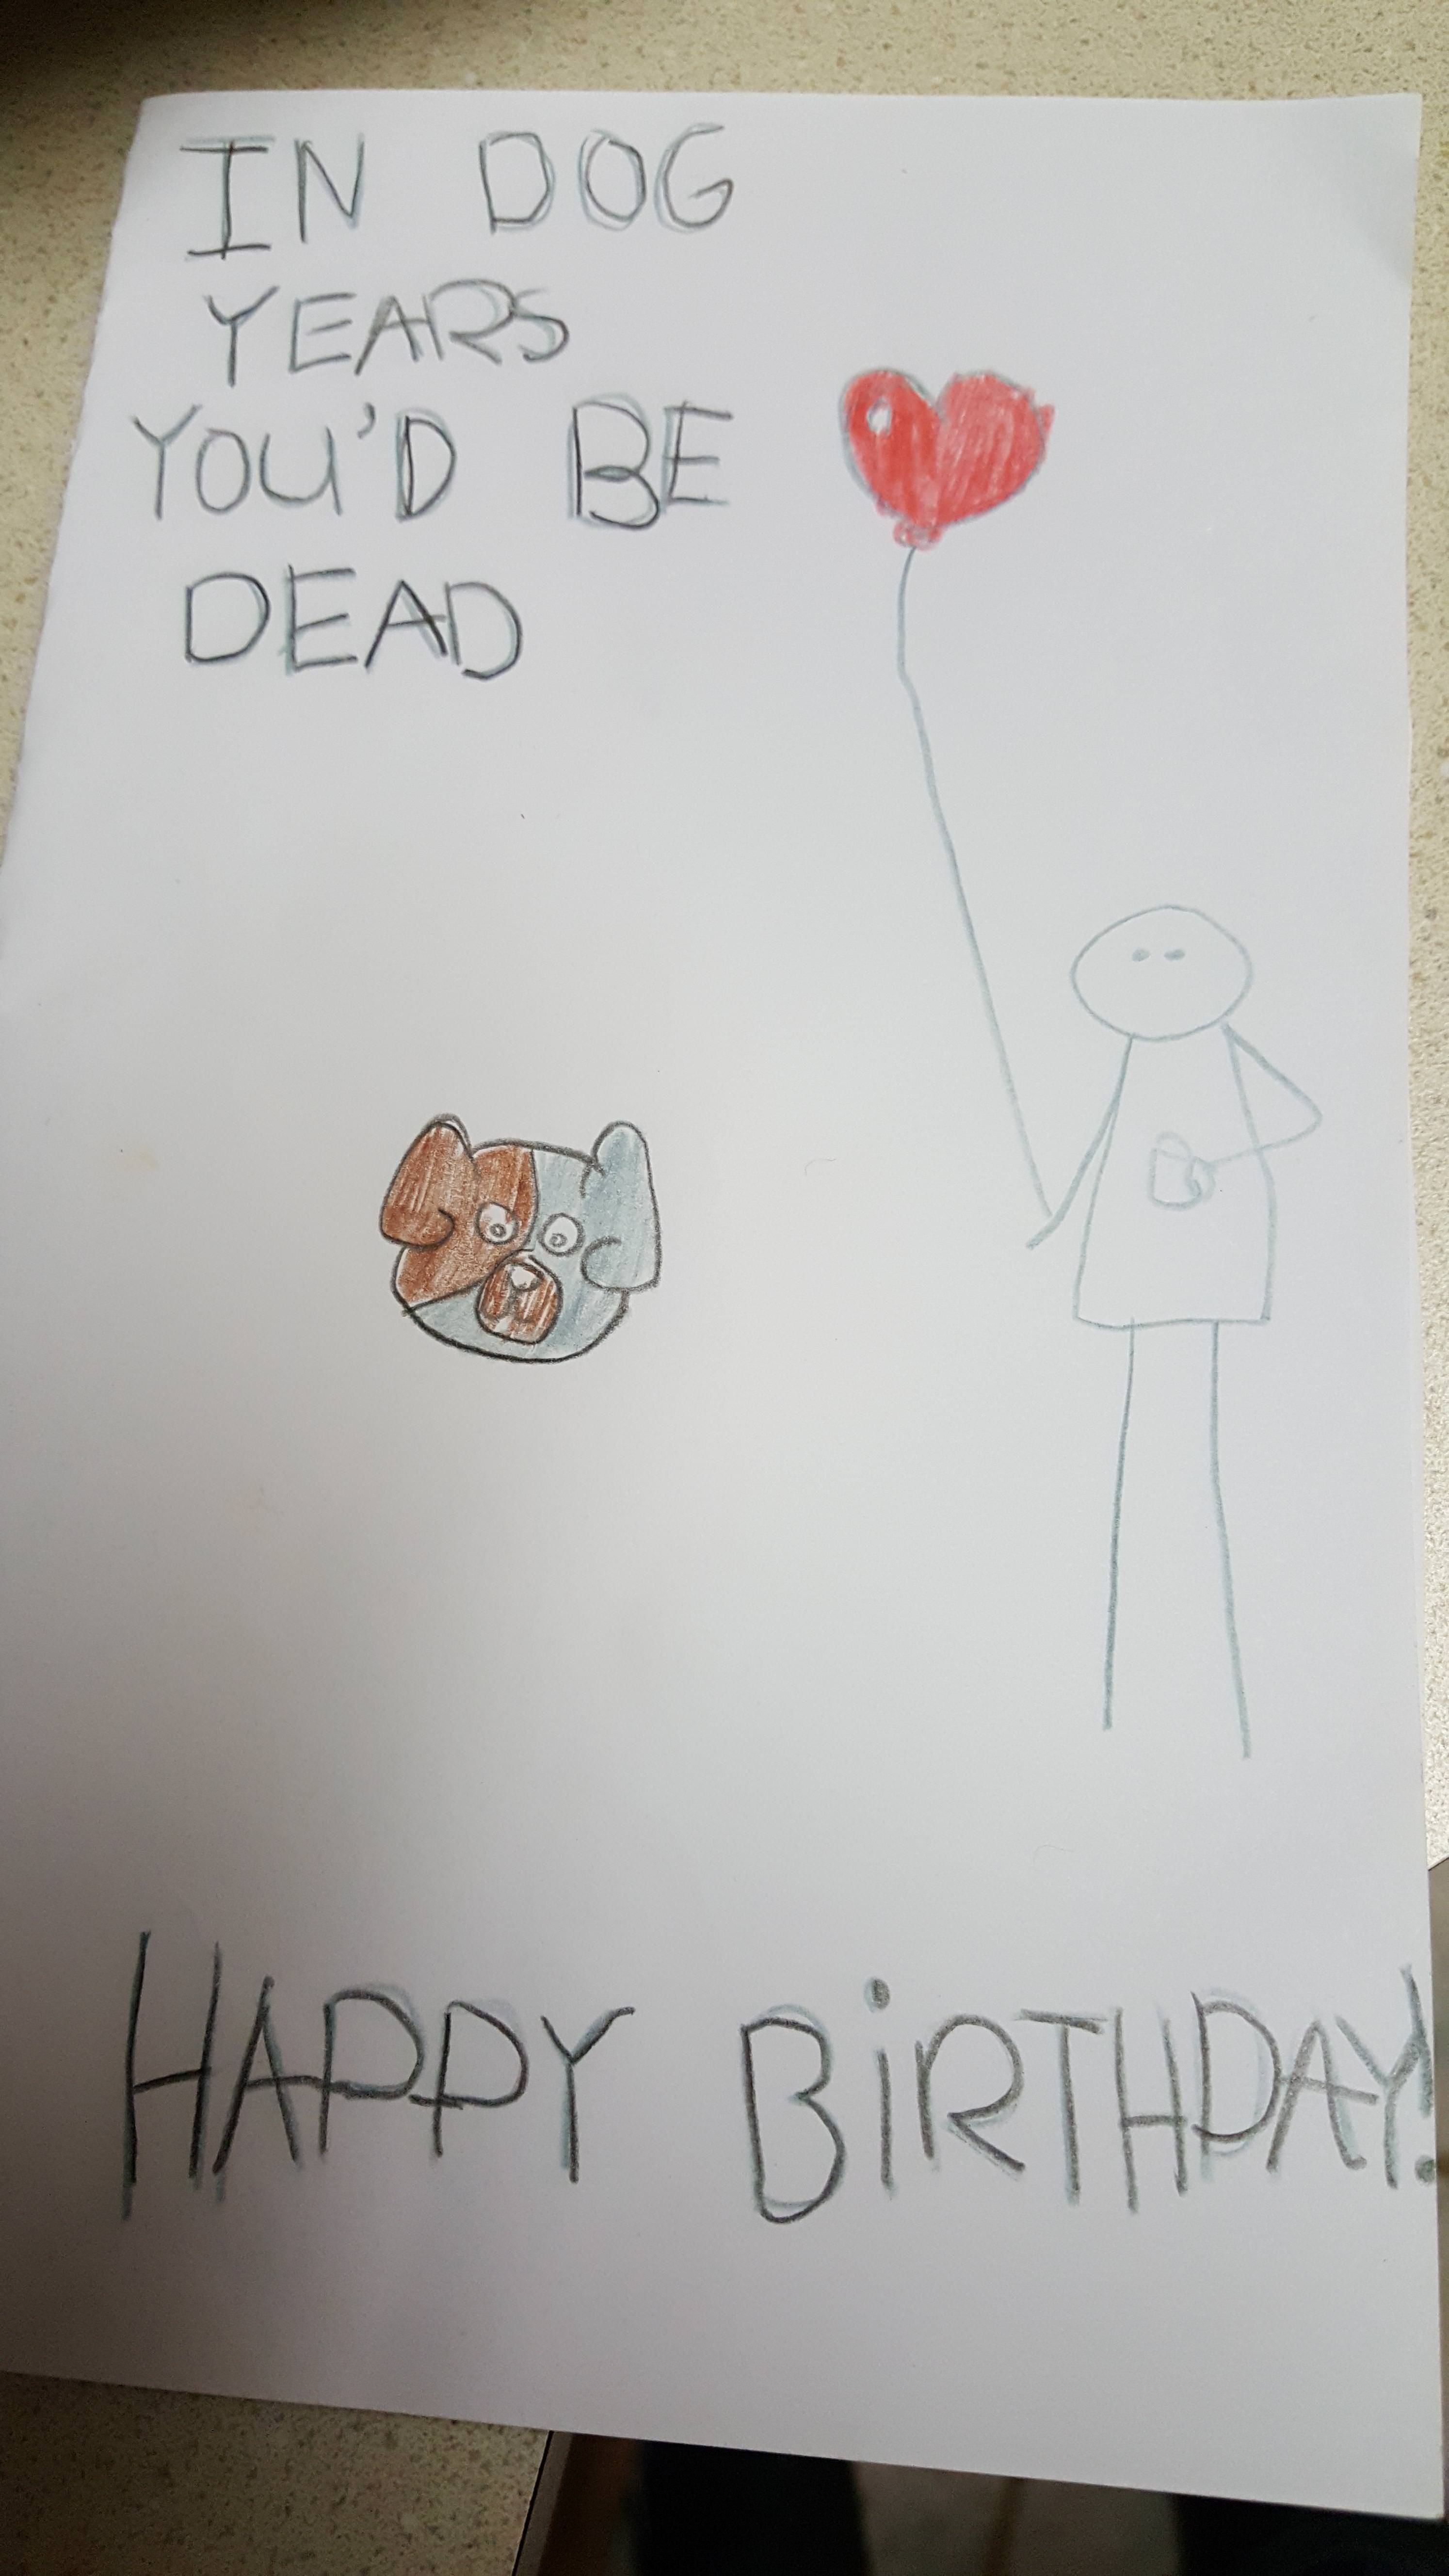 My girlfriend's daughter made me a bday card